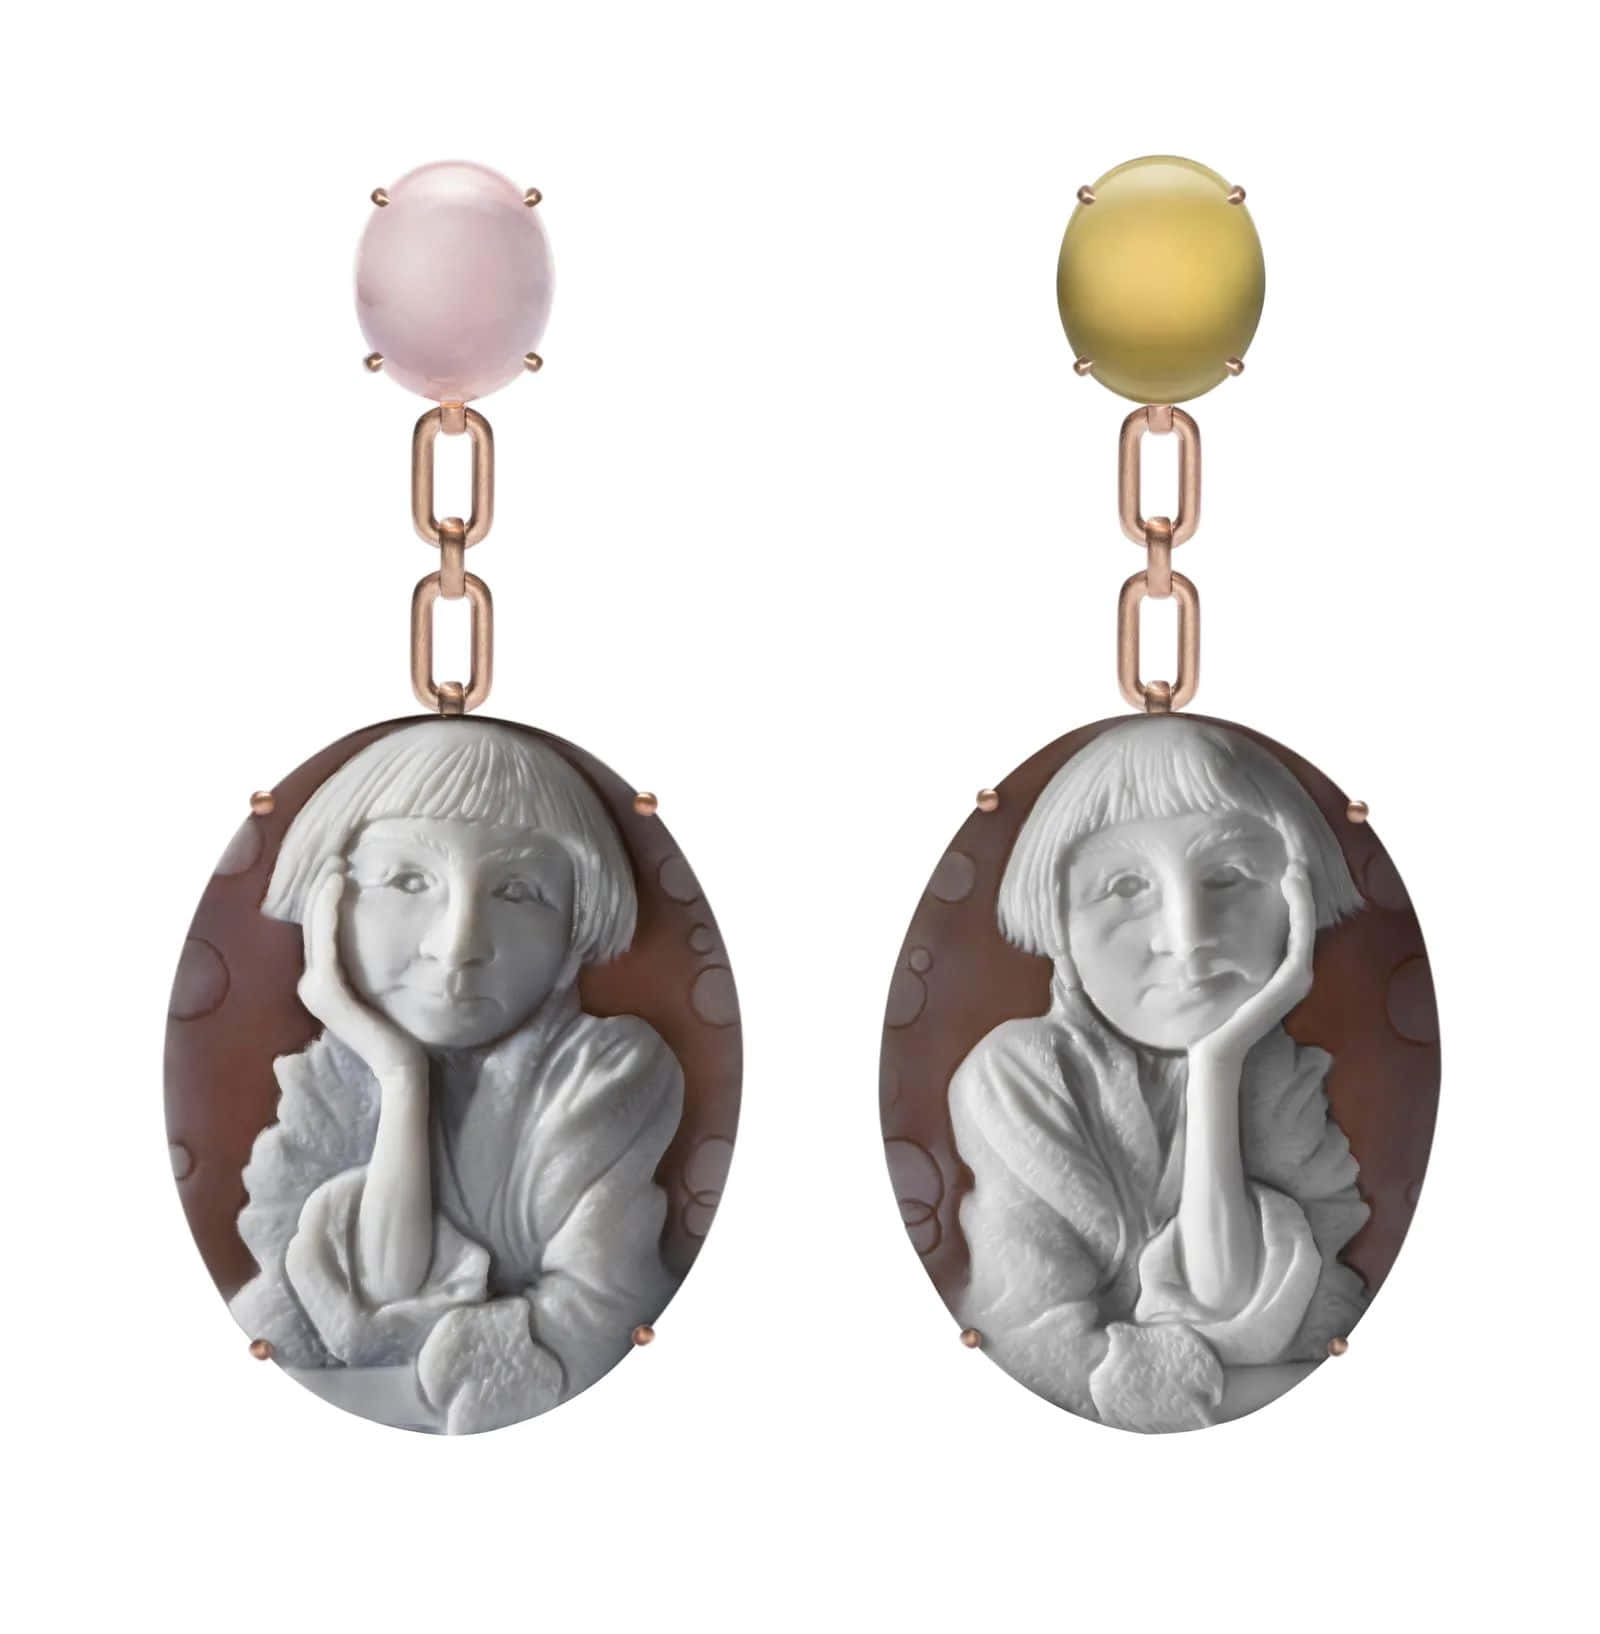 Cameo Earringswith Child Portrait Wallpaper